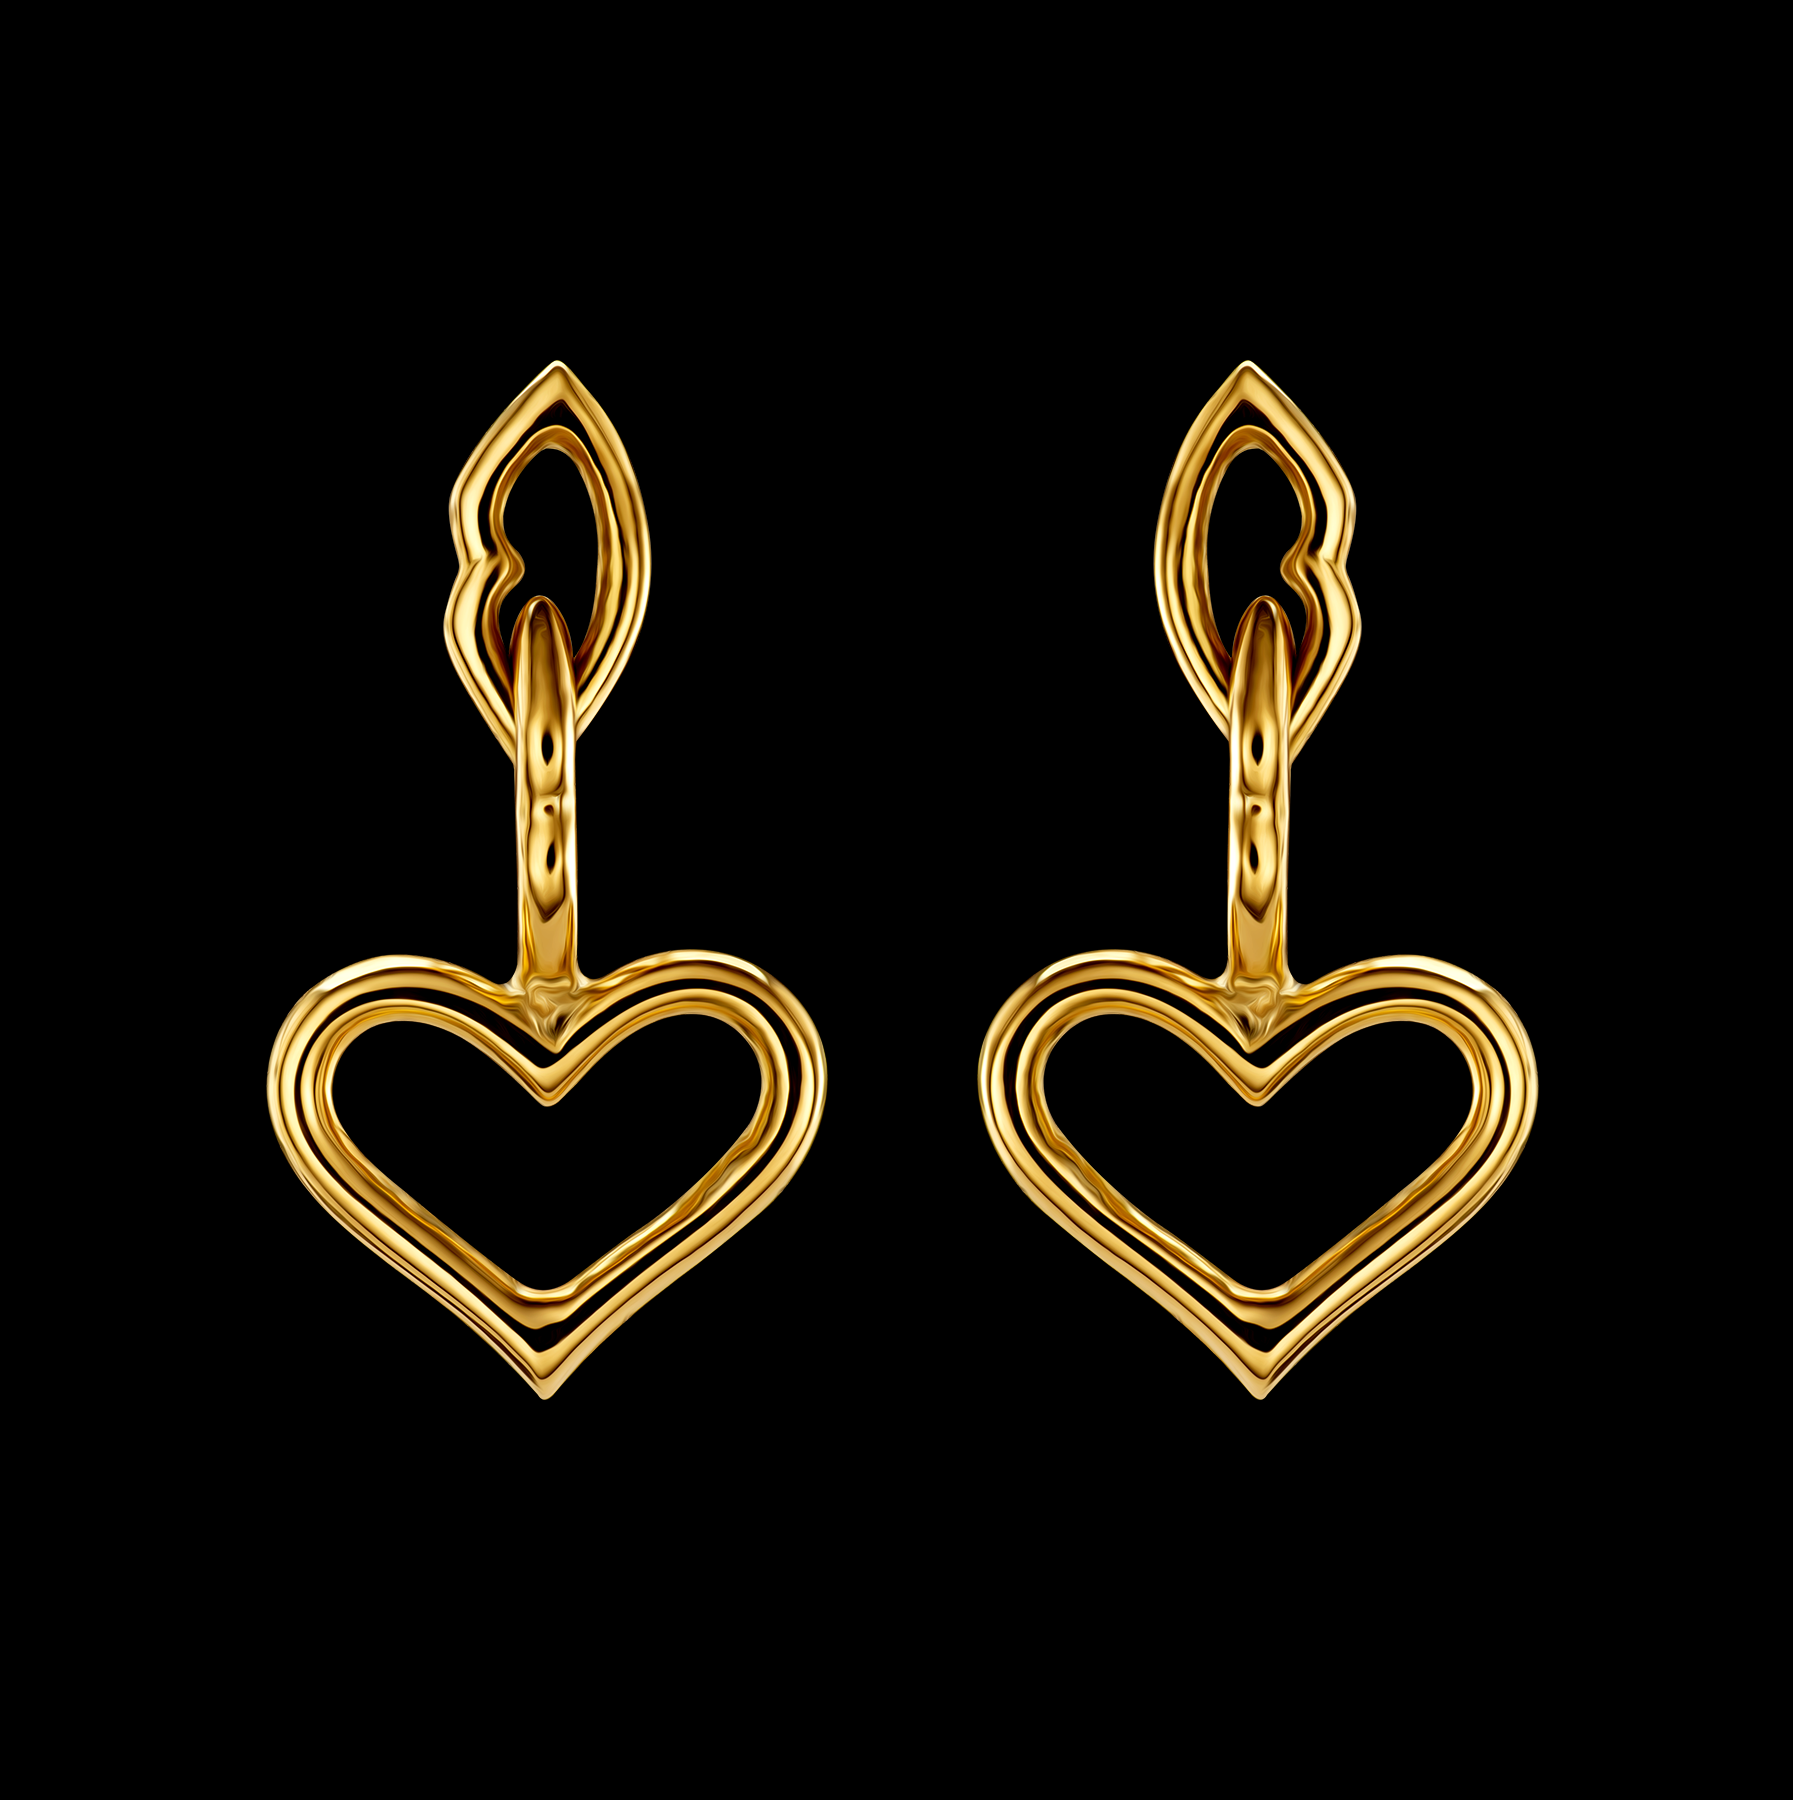 The Love and Kisses chain Earrings by designer Solange Azagury-Partridge - 18 carat Yellow Gold - front view